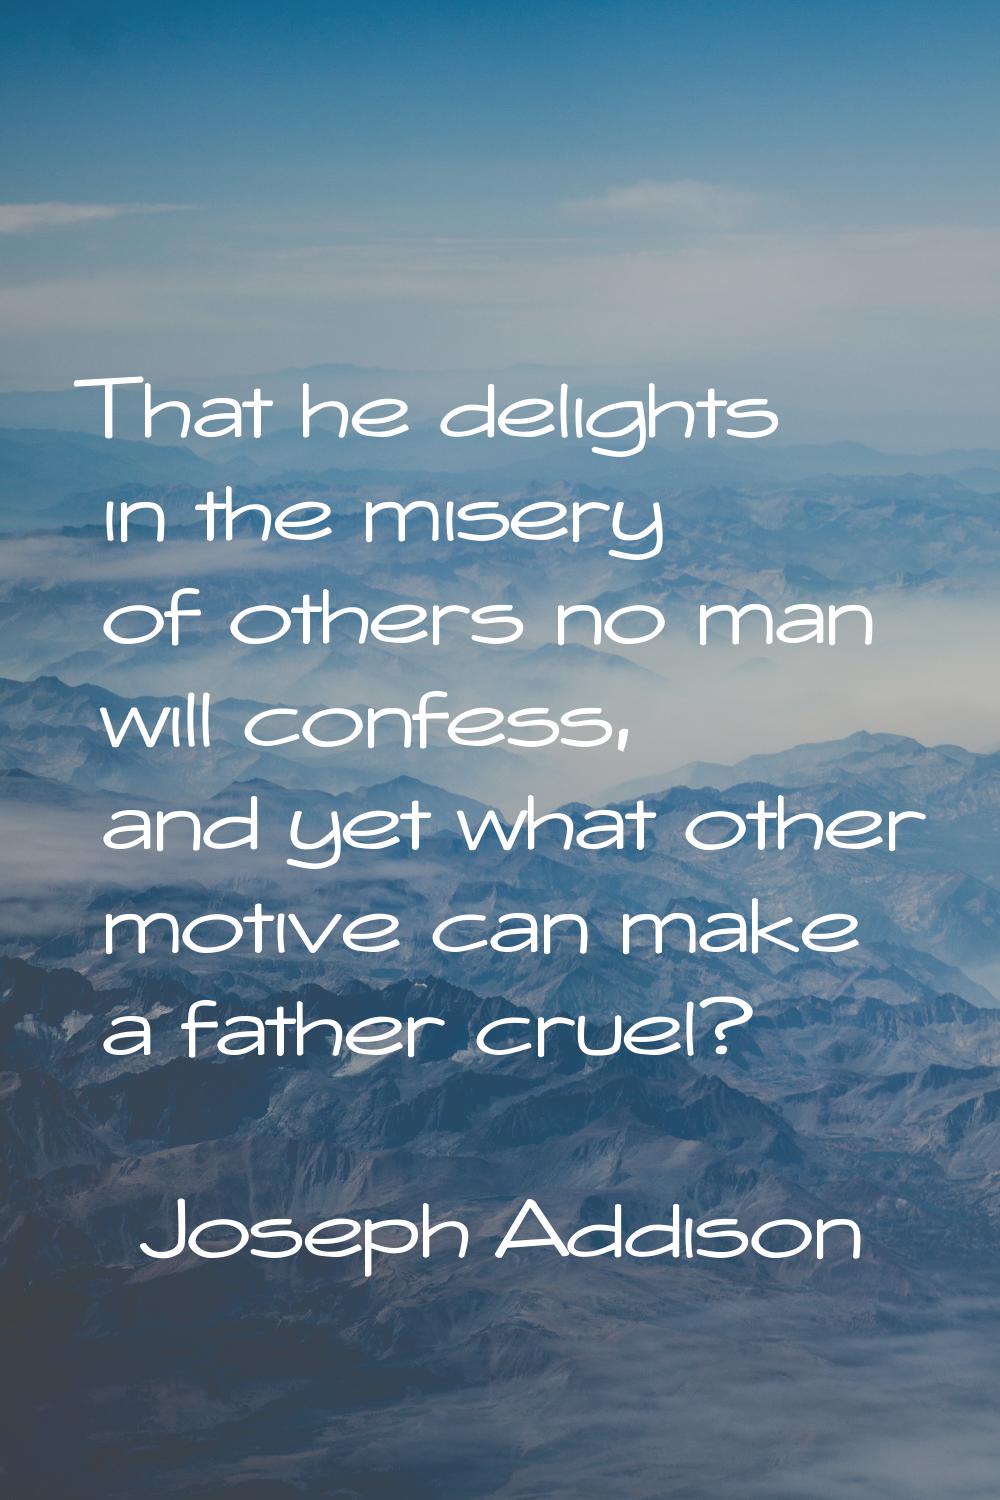 That he delights in the misery of others no man will confess, and yet what other motive can make a 